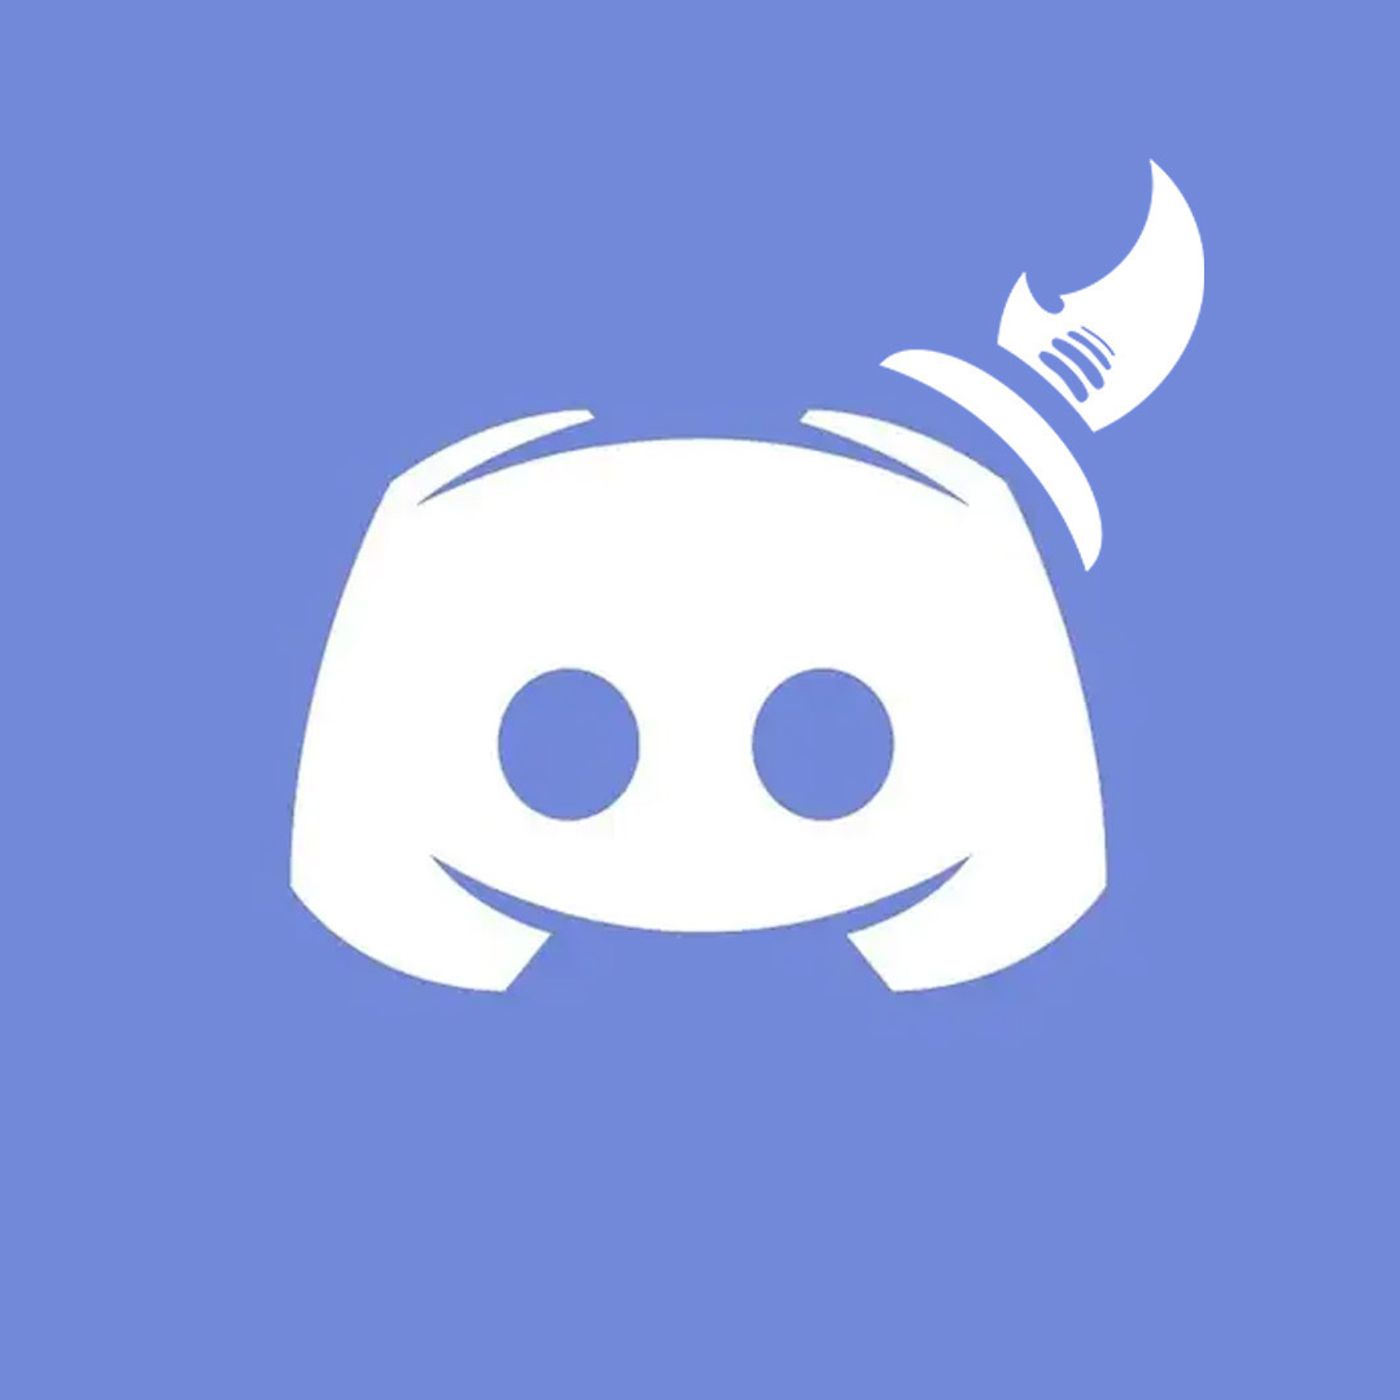 Giant Bomb Presents: Discord Town Hall 07/07/23